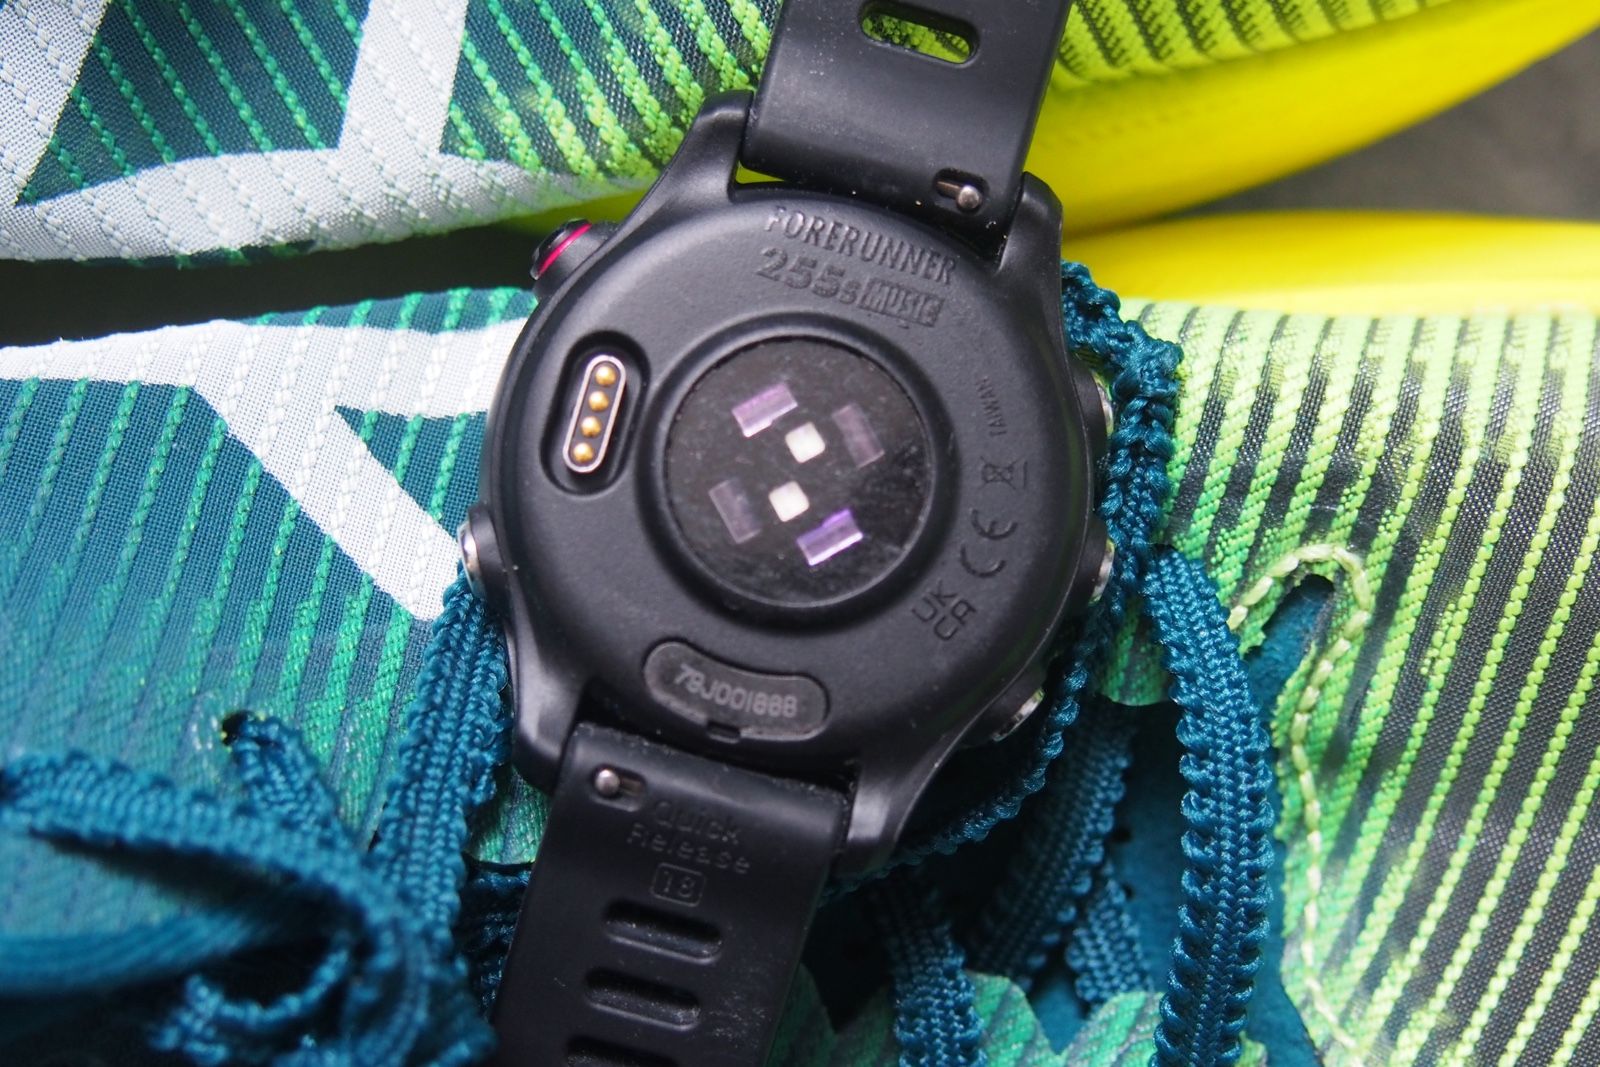 Guide: Garmin Forerunner 255 music - GPS watch review and features